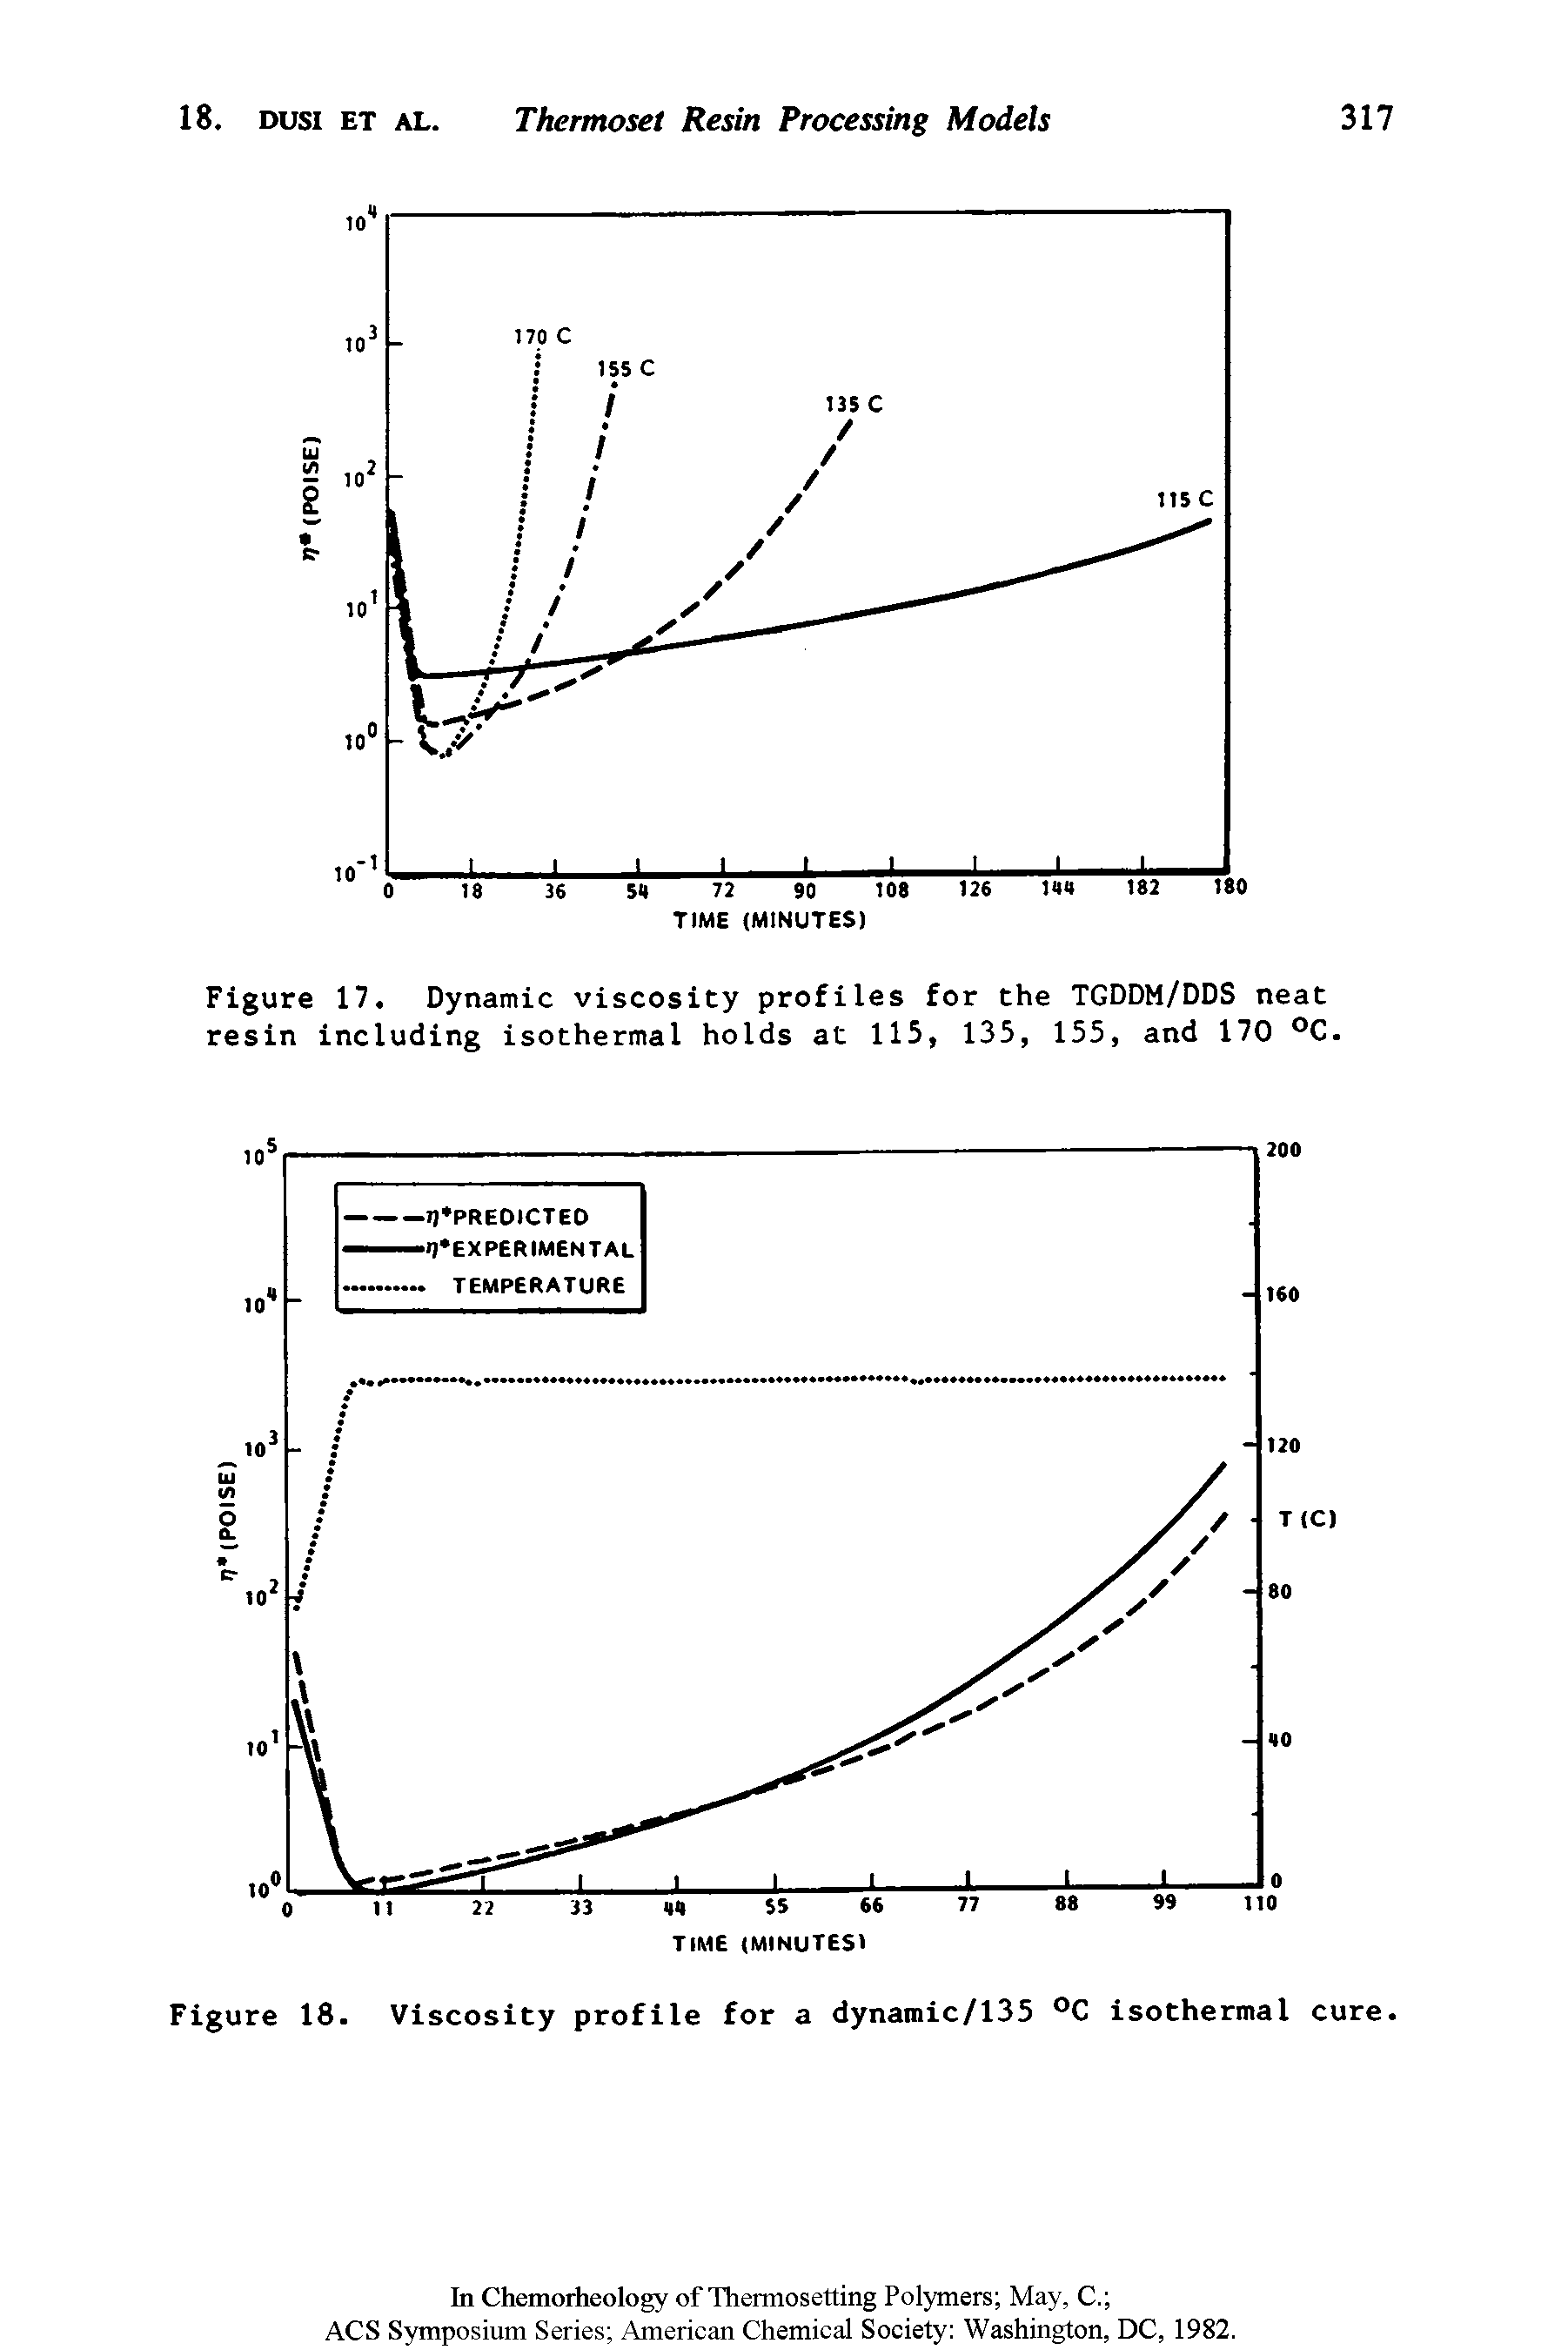 Figure 17. Dynamic viscosity profiles for the TGDDM/DDS neat resin including isothermal holds at 115, 135, 155, and 170 °C.